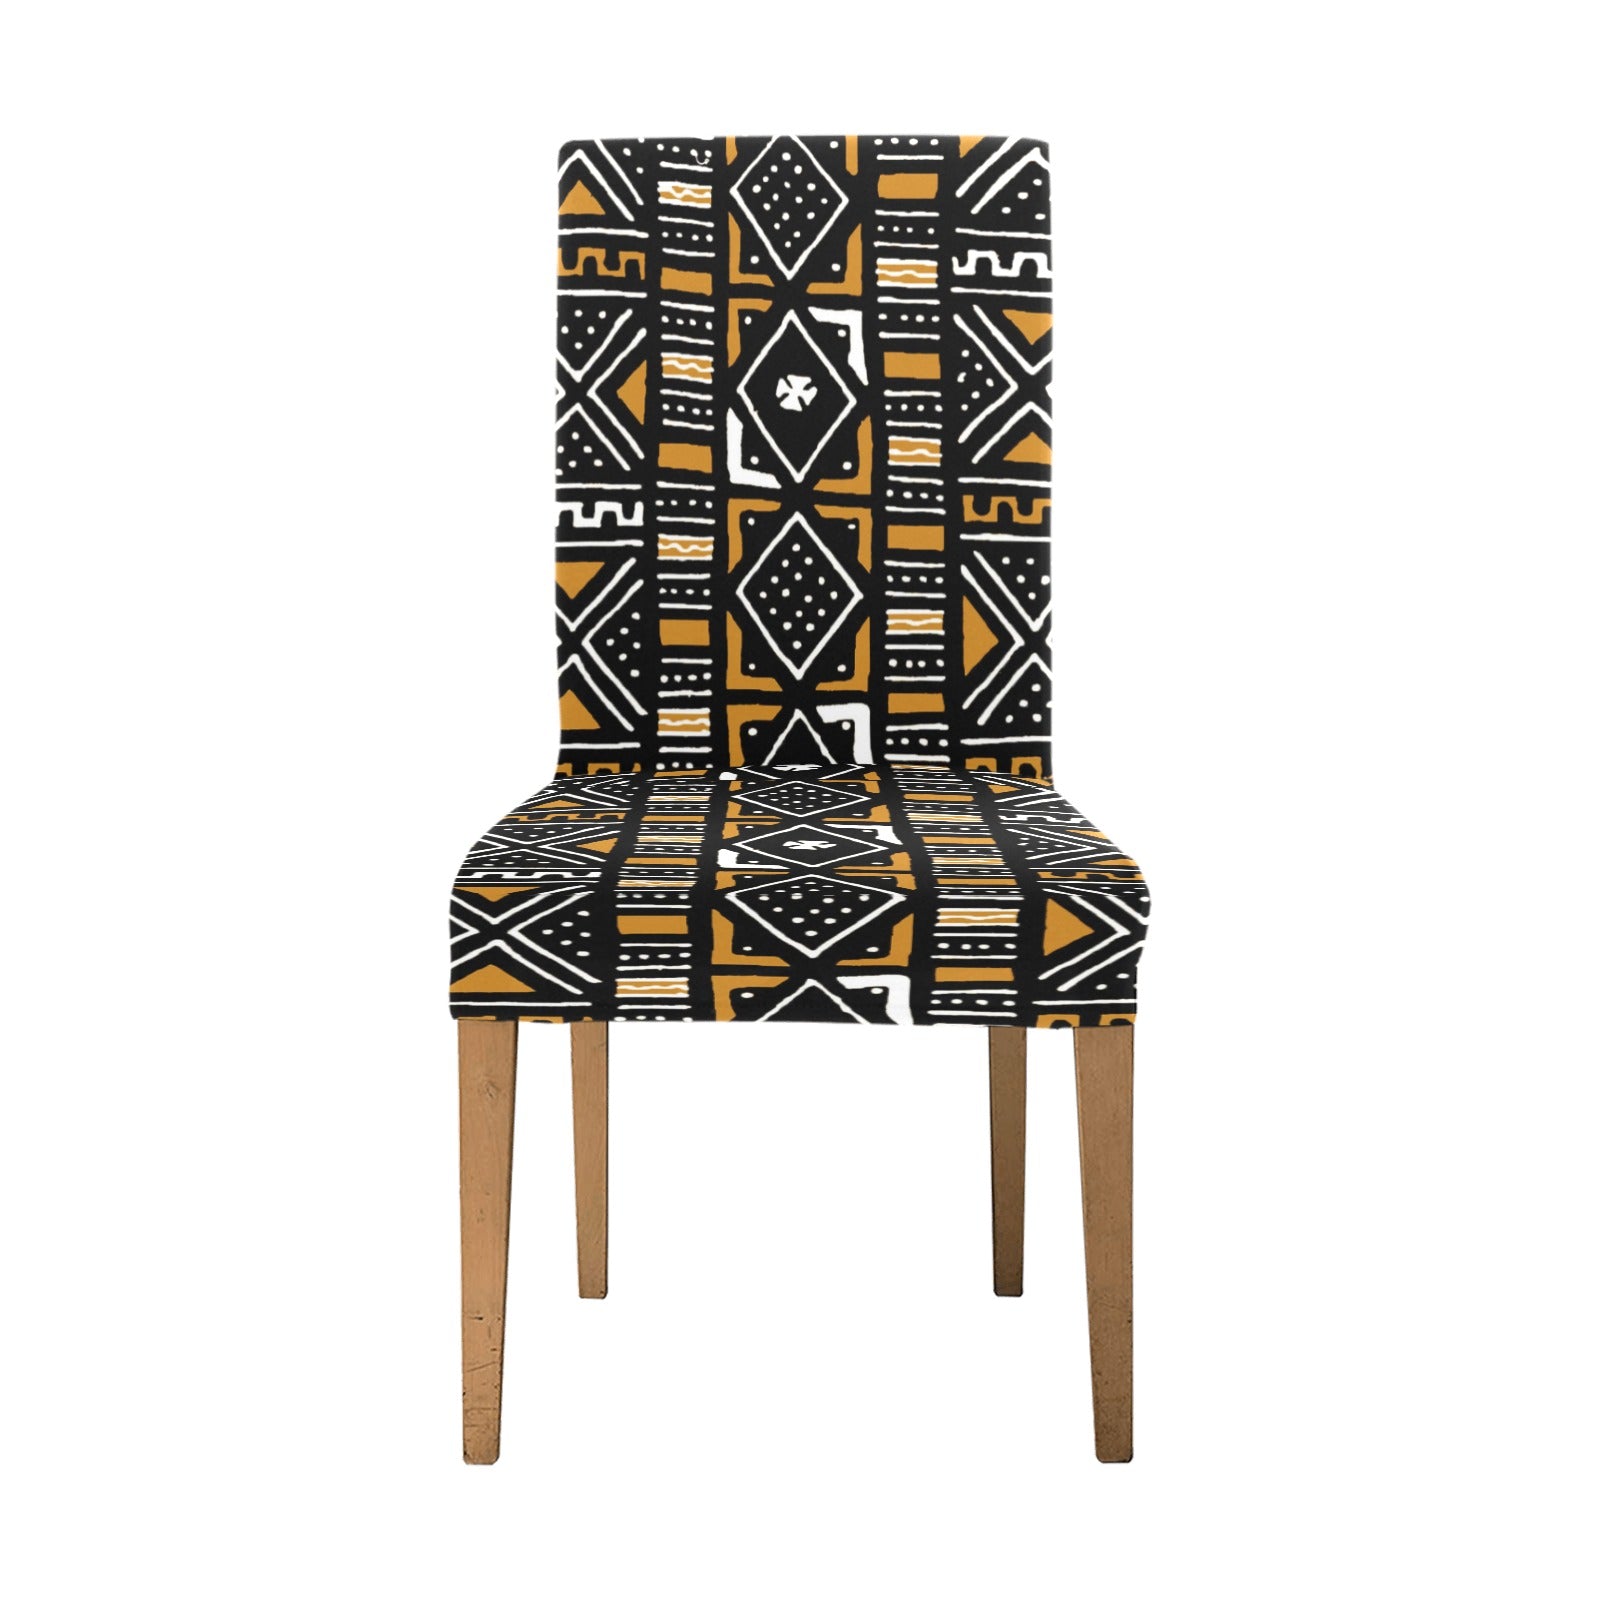 African Mudcloth Print Chair Covers: Stretchy and Removable